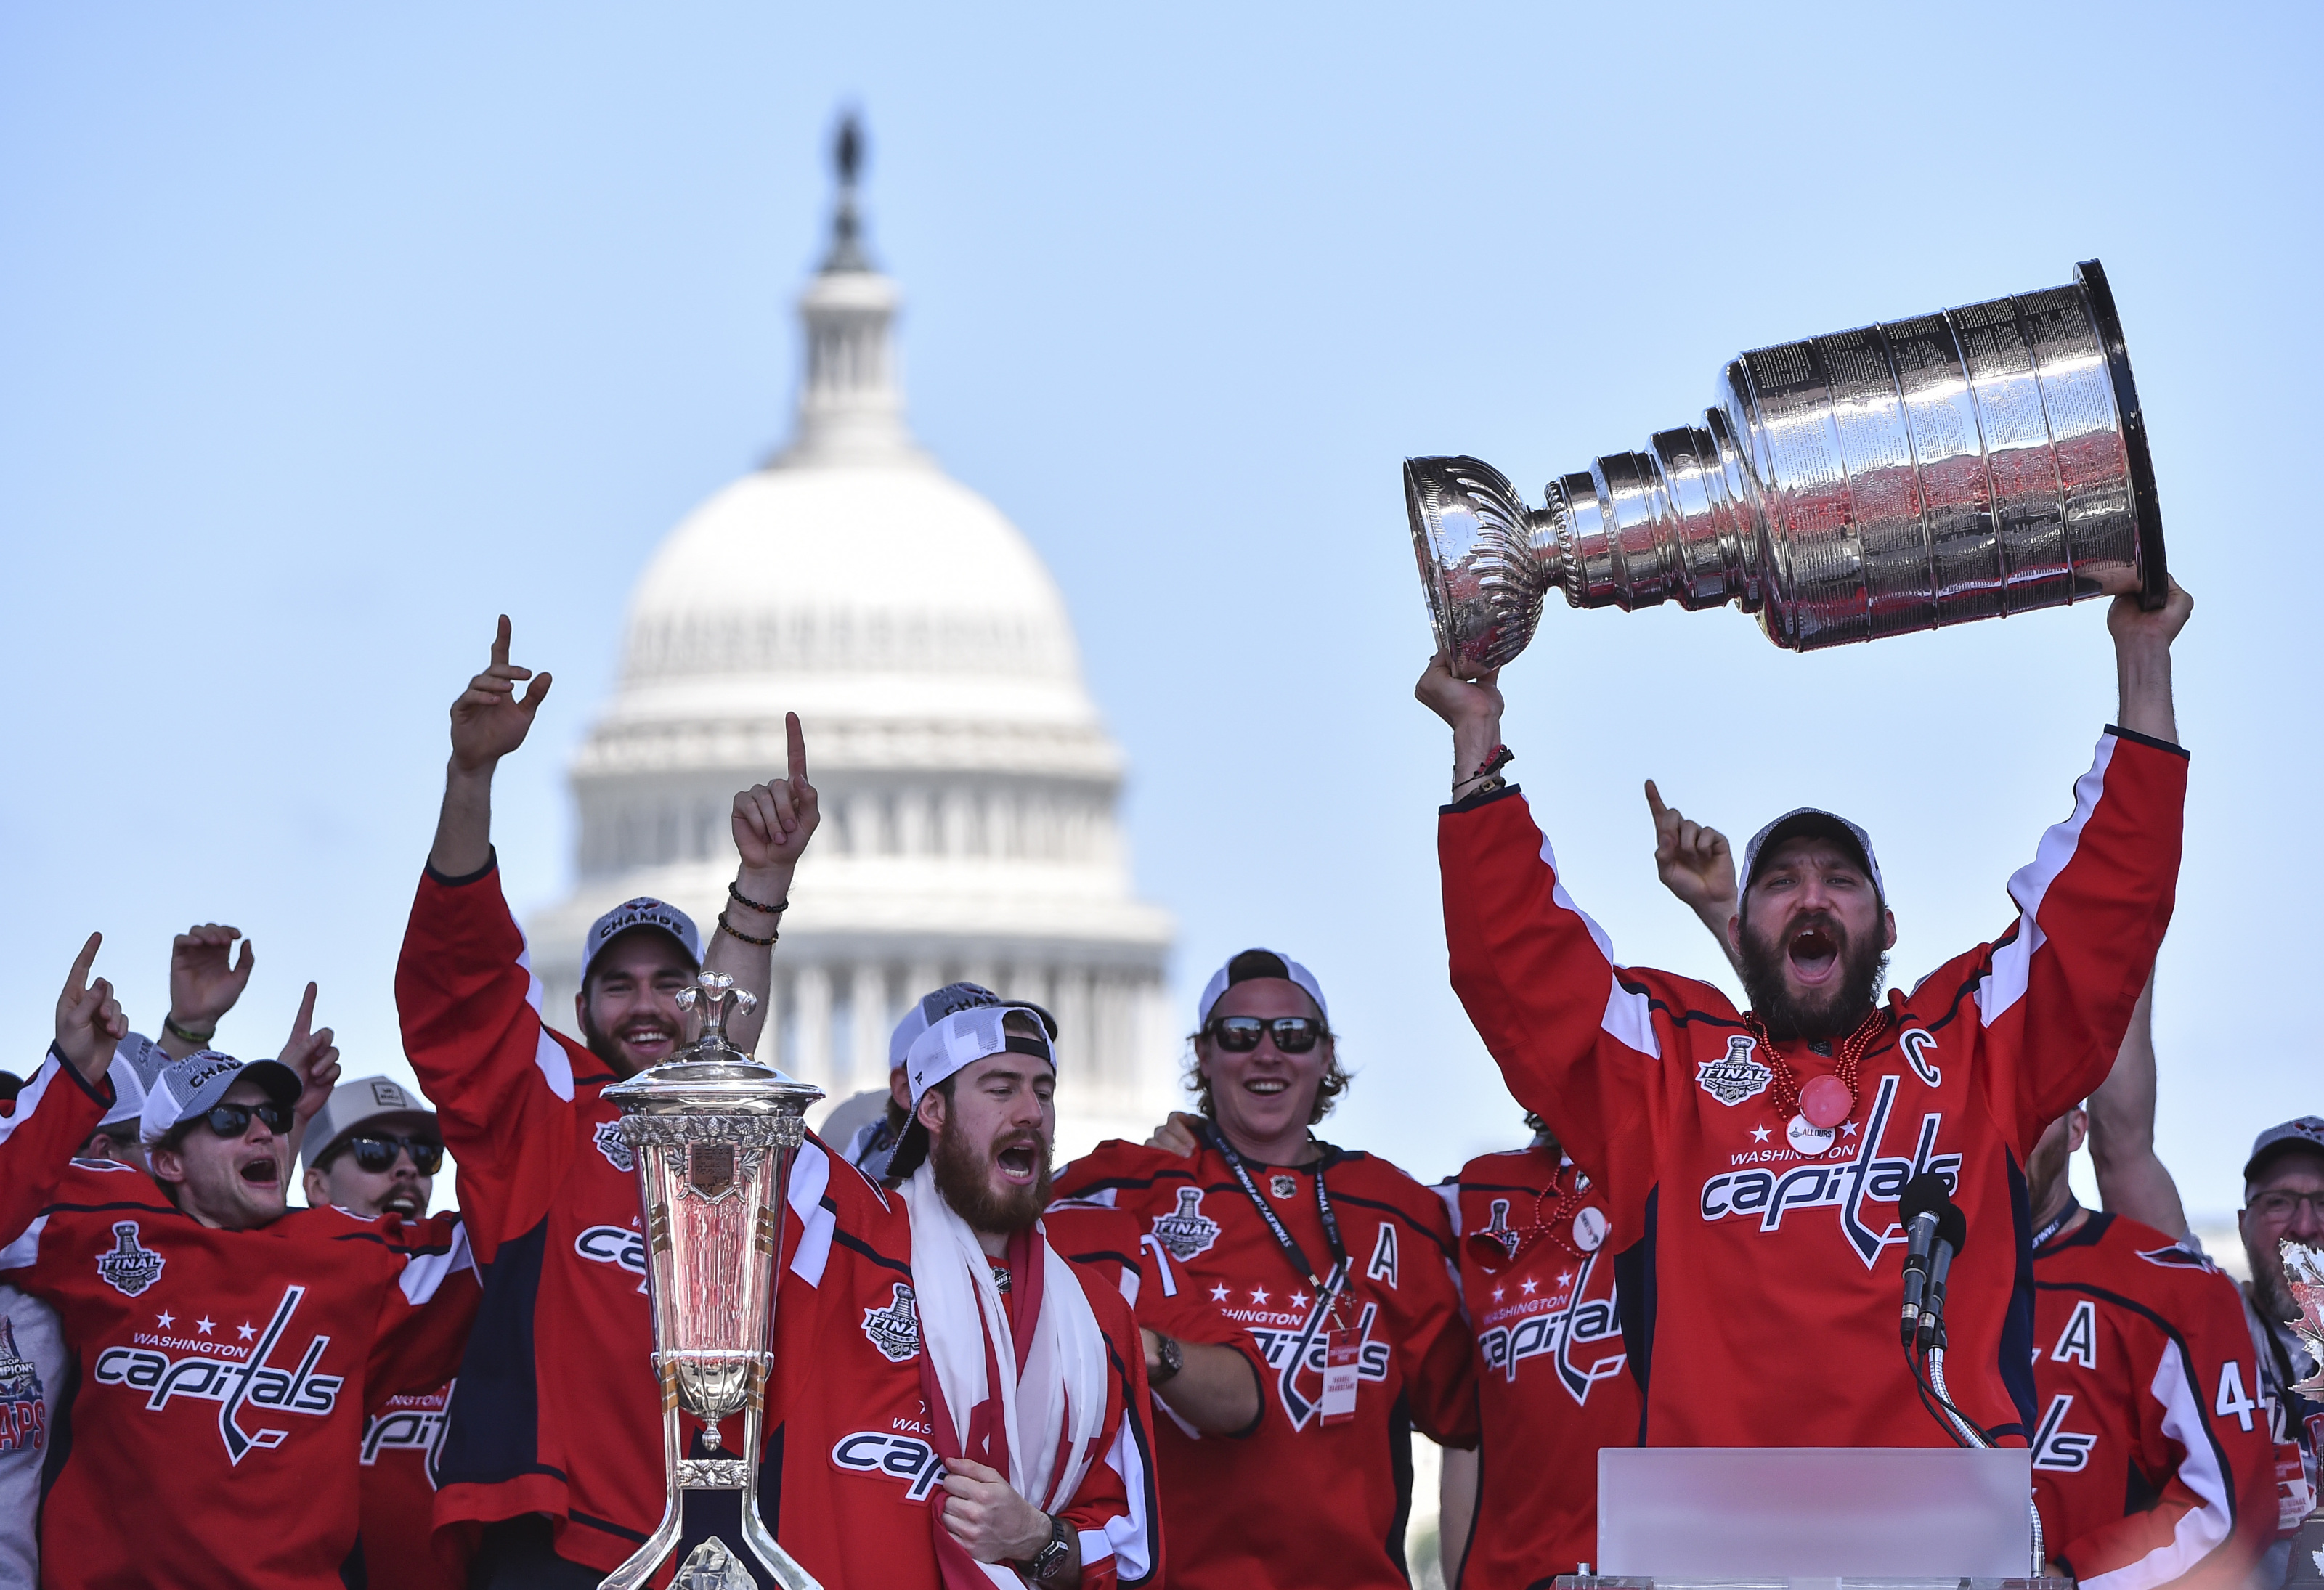 Capitals parade 2018: Date, time, and other info for Washington's